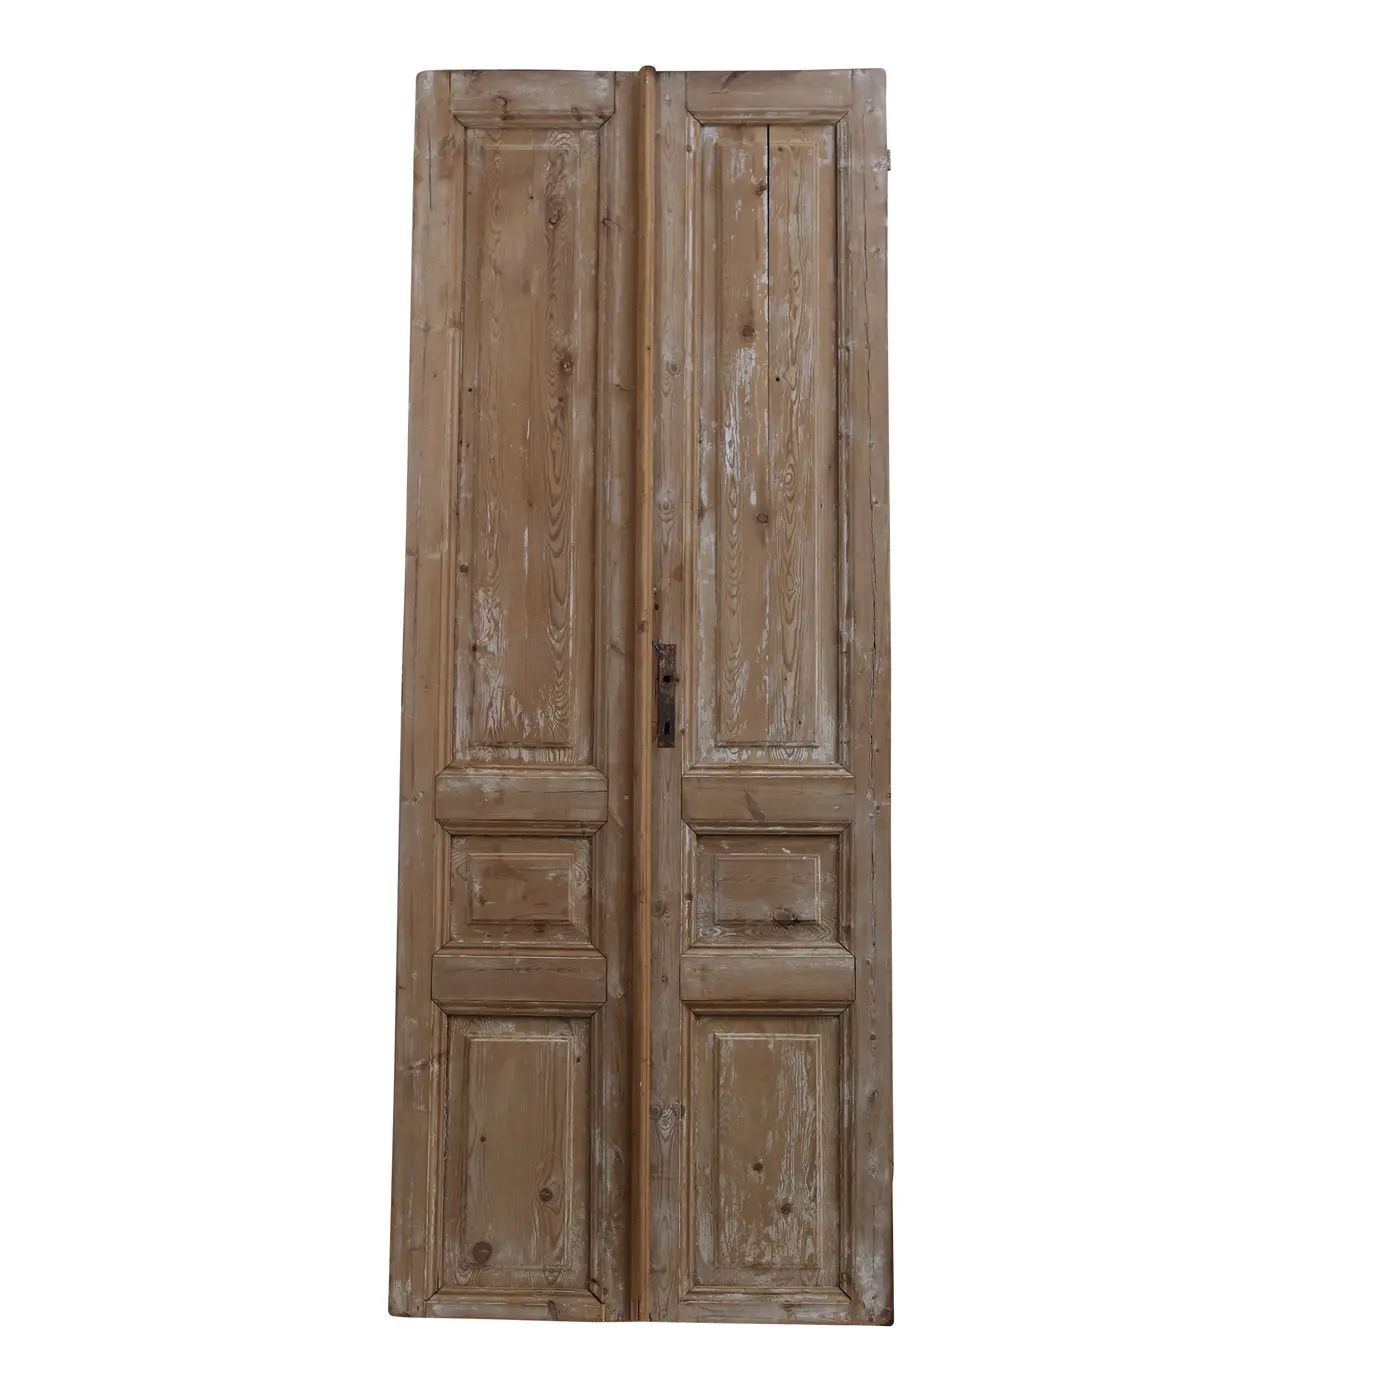 Late 19th Century Double French Doors - a Pair | Chairish